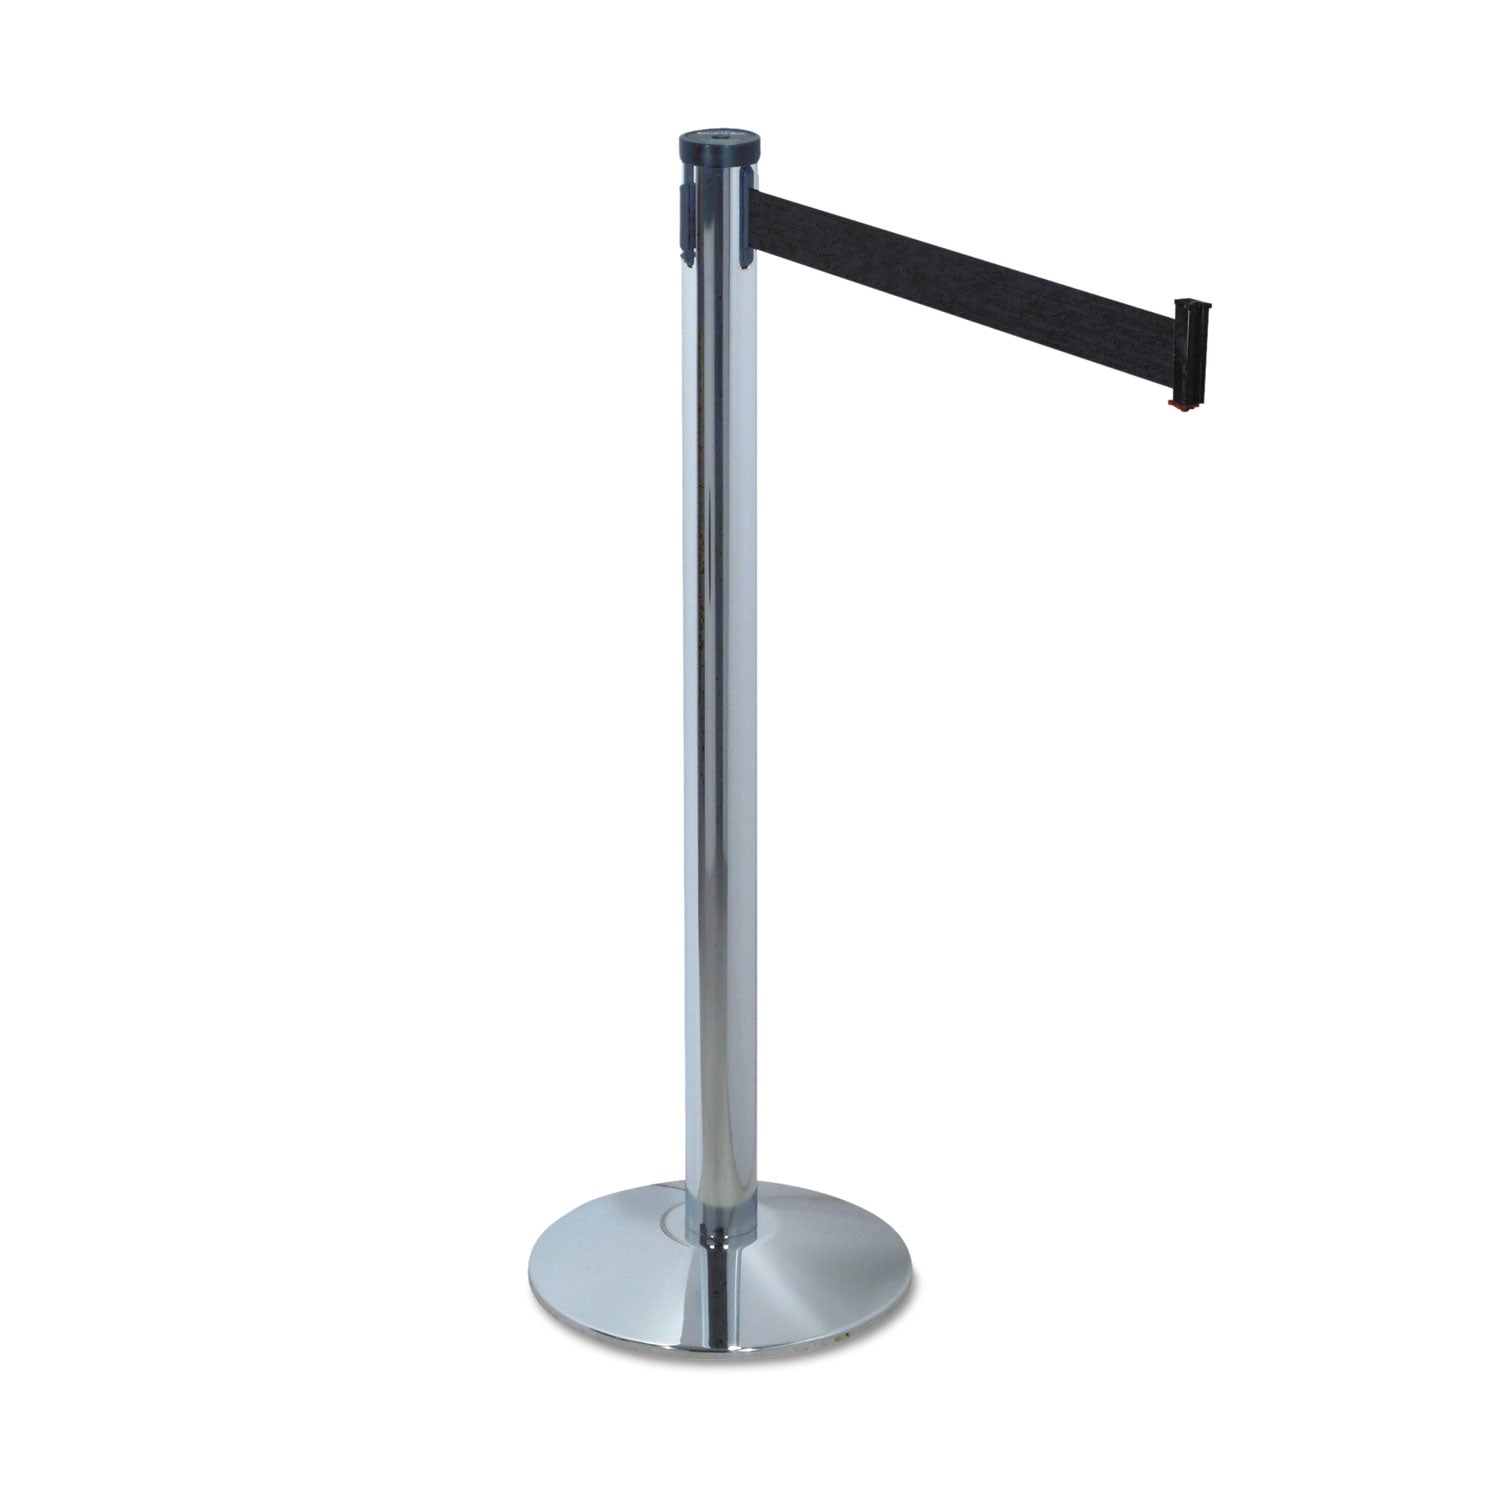 Adjusta-Tape Crowd Control Stanchion Base Only, Polished Aluminum, 14" Diameter, Silver, 2/Box - 